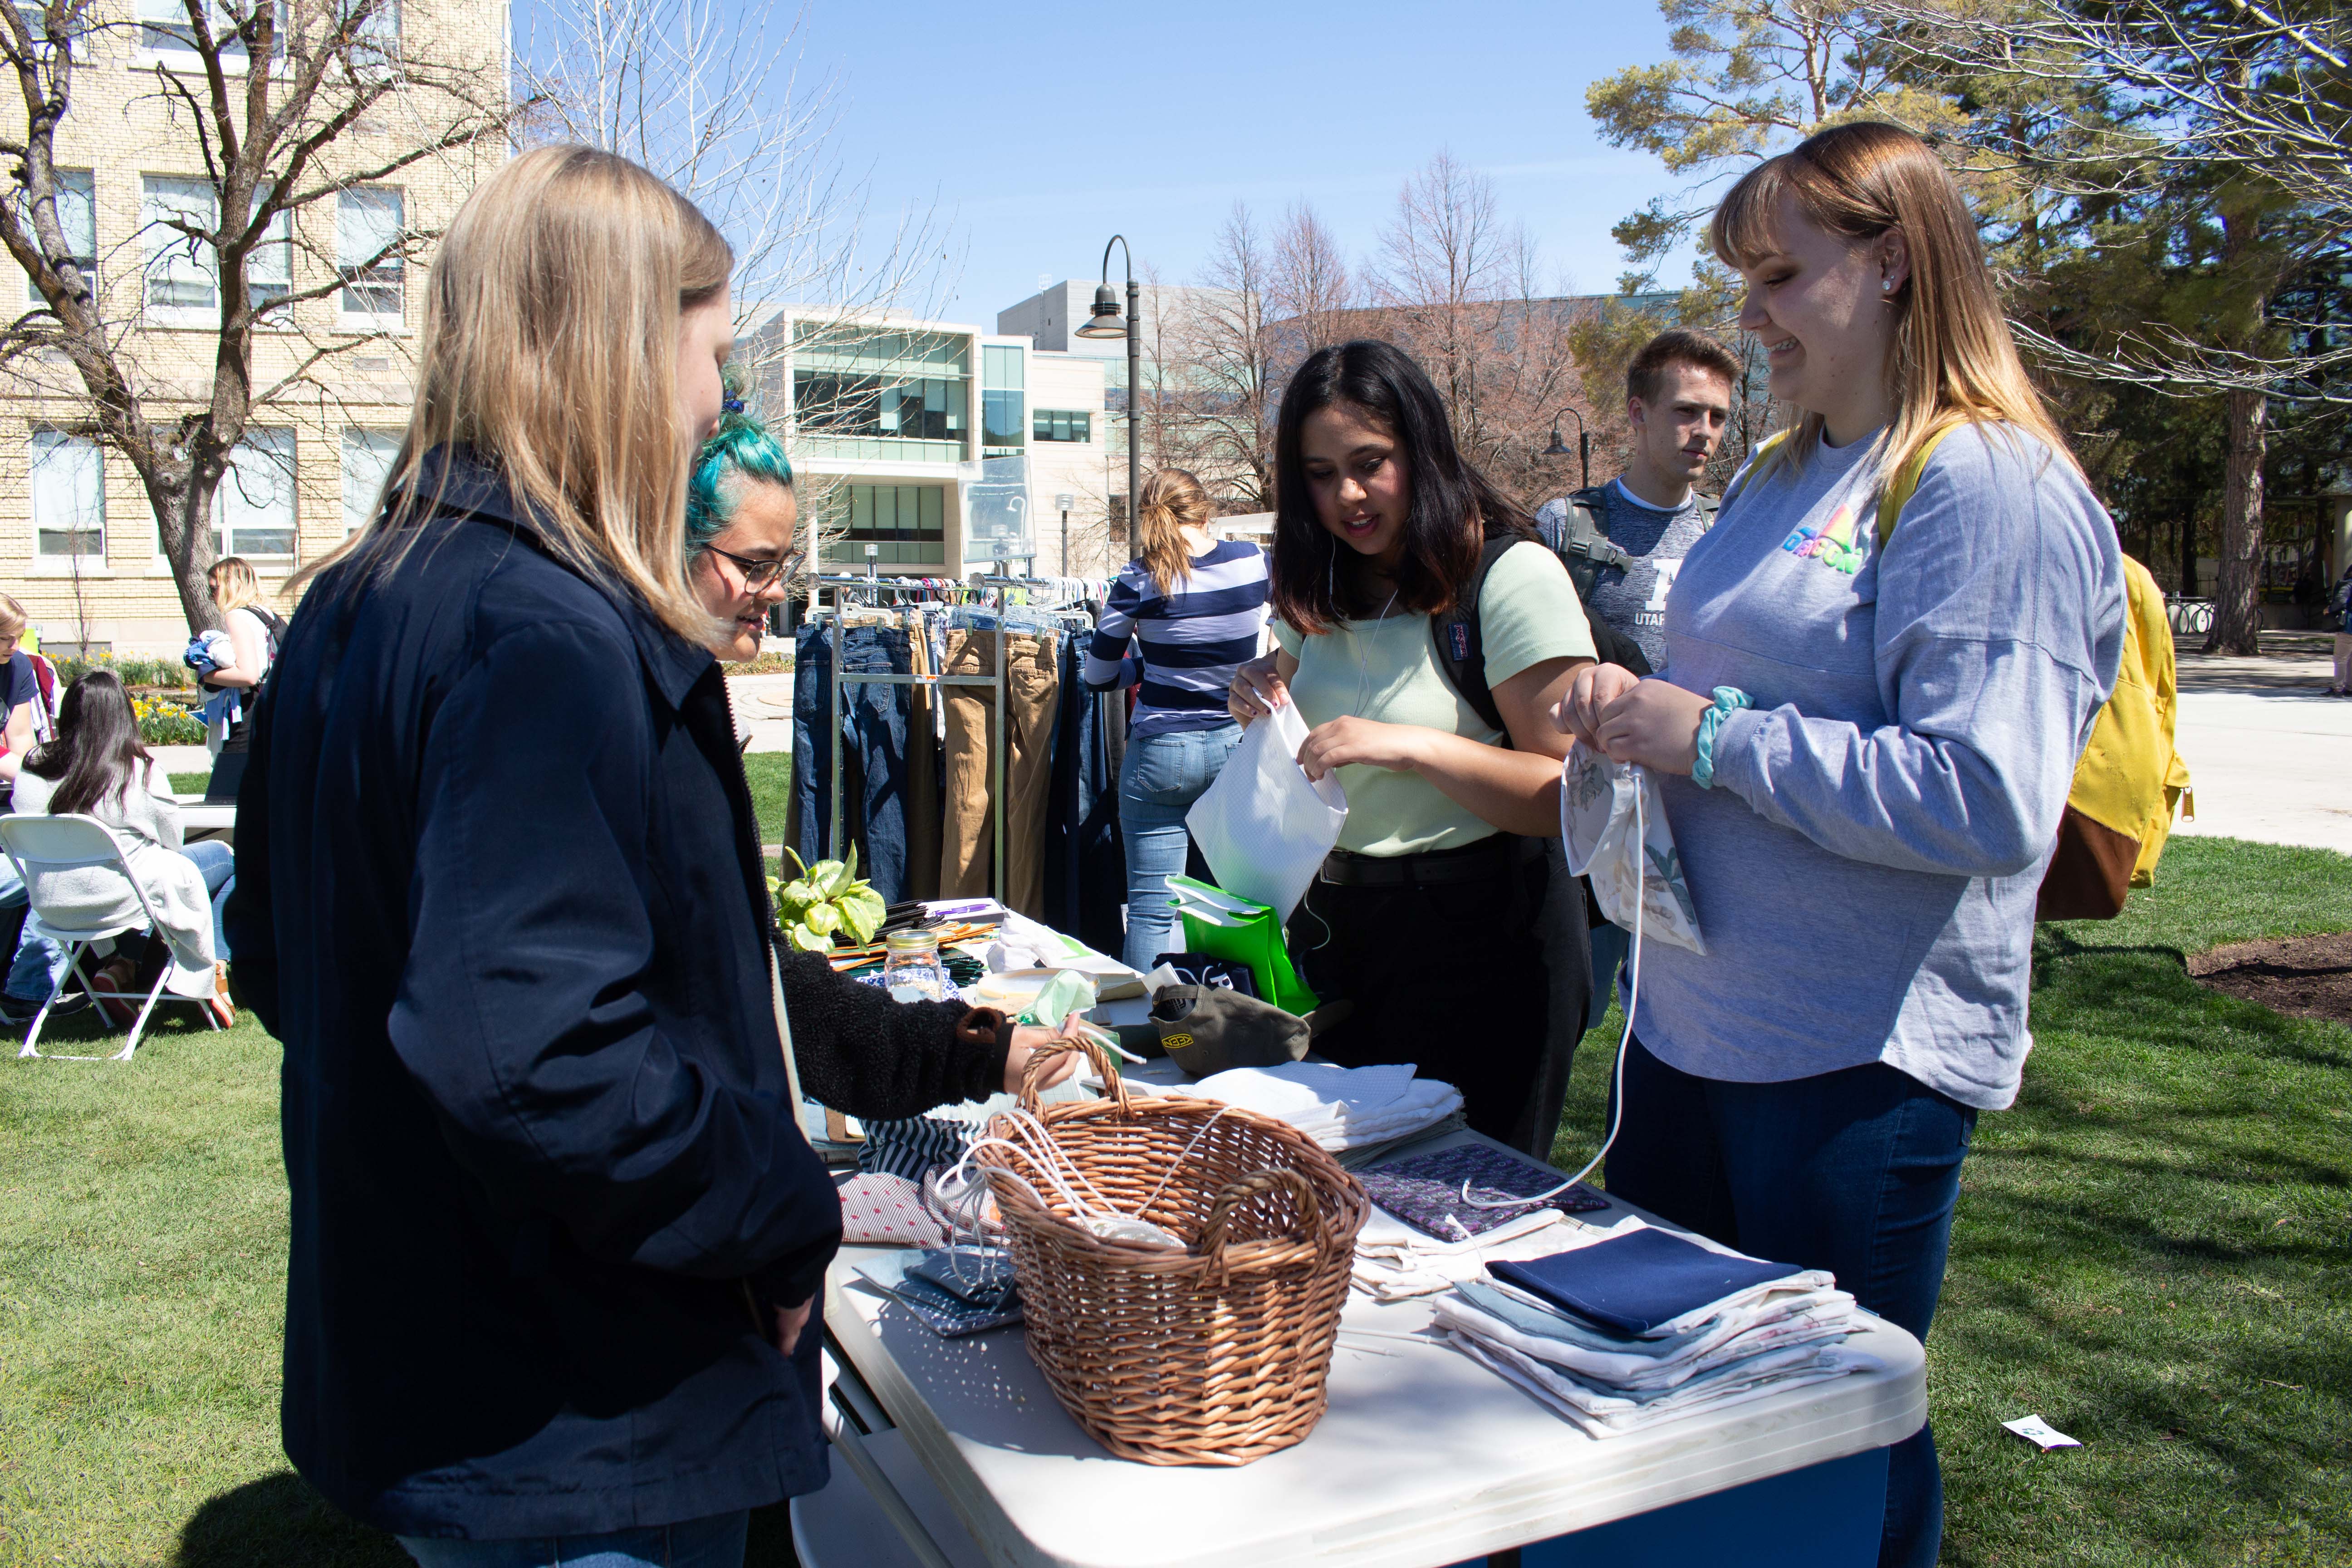 Students visit an informational table on campus